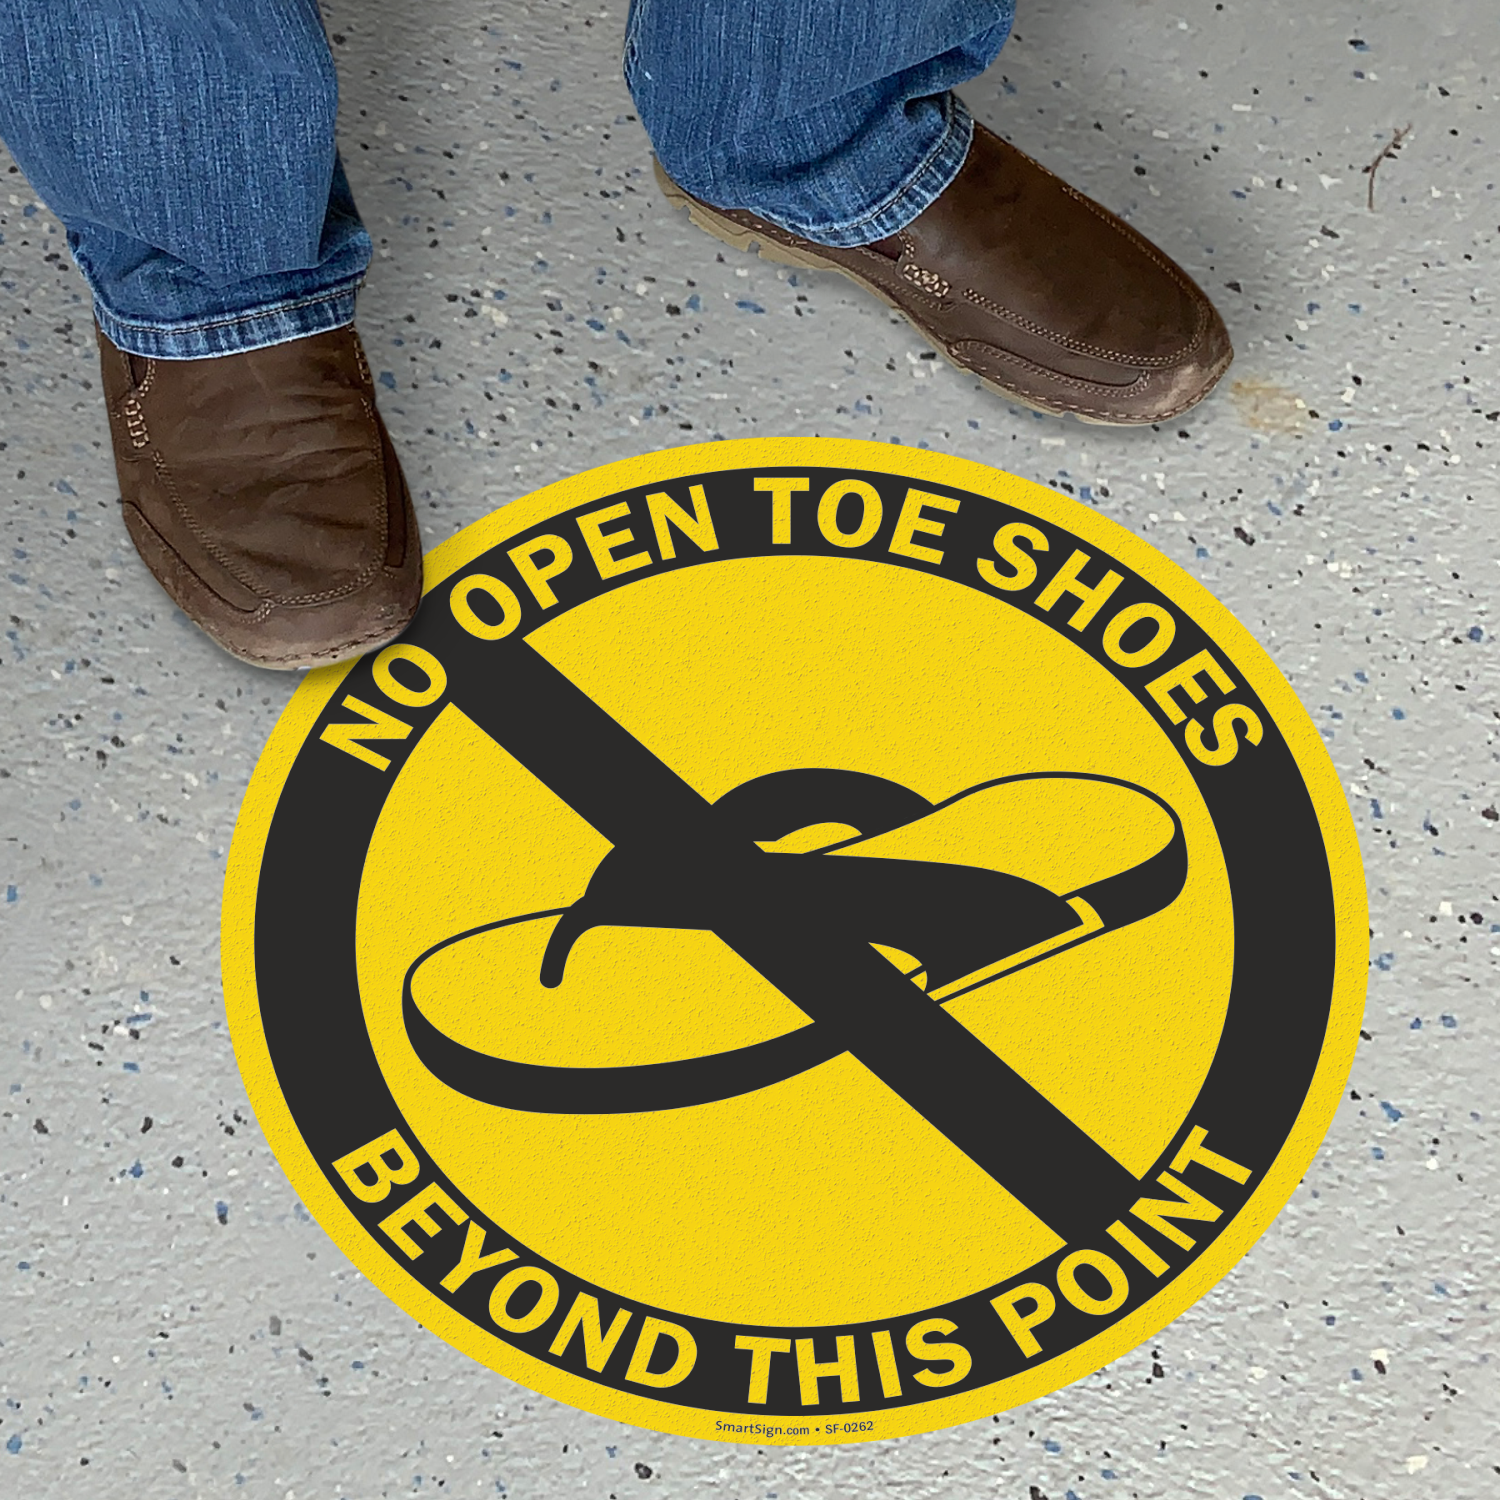 No Open Toe Shoes Beyond This Point Adhesive Floor Sign